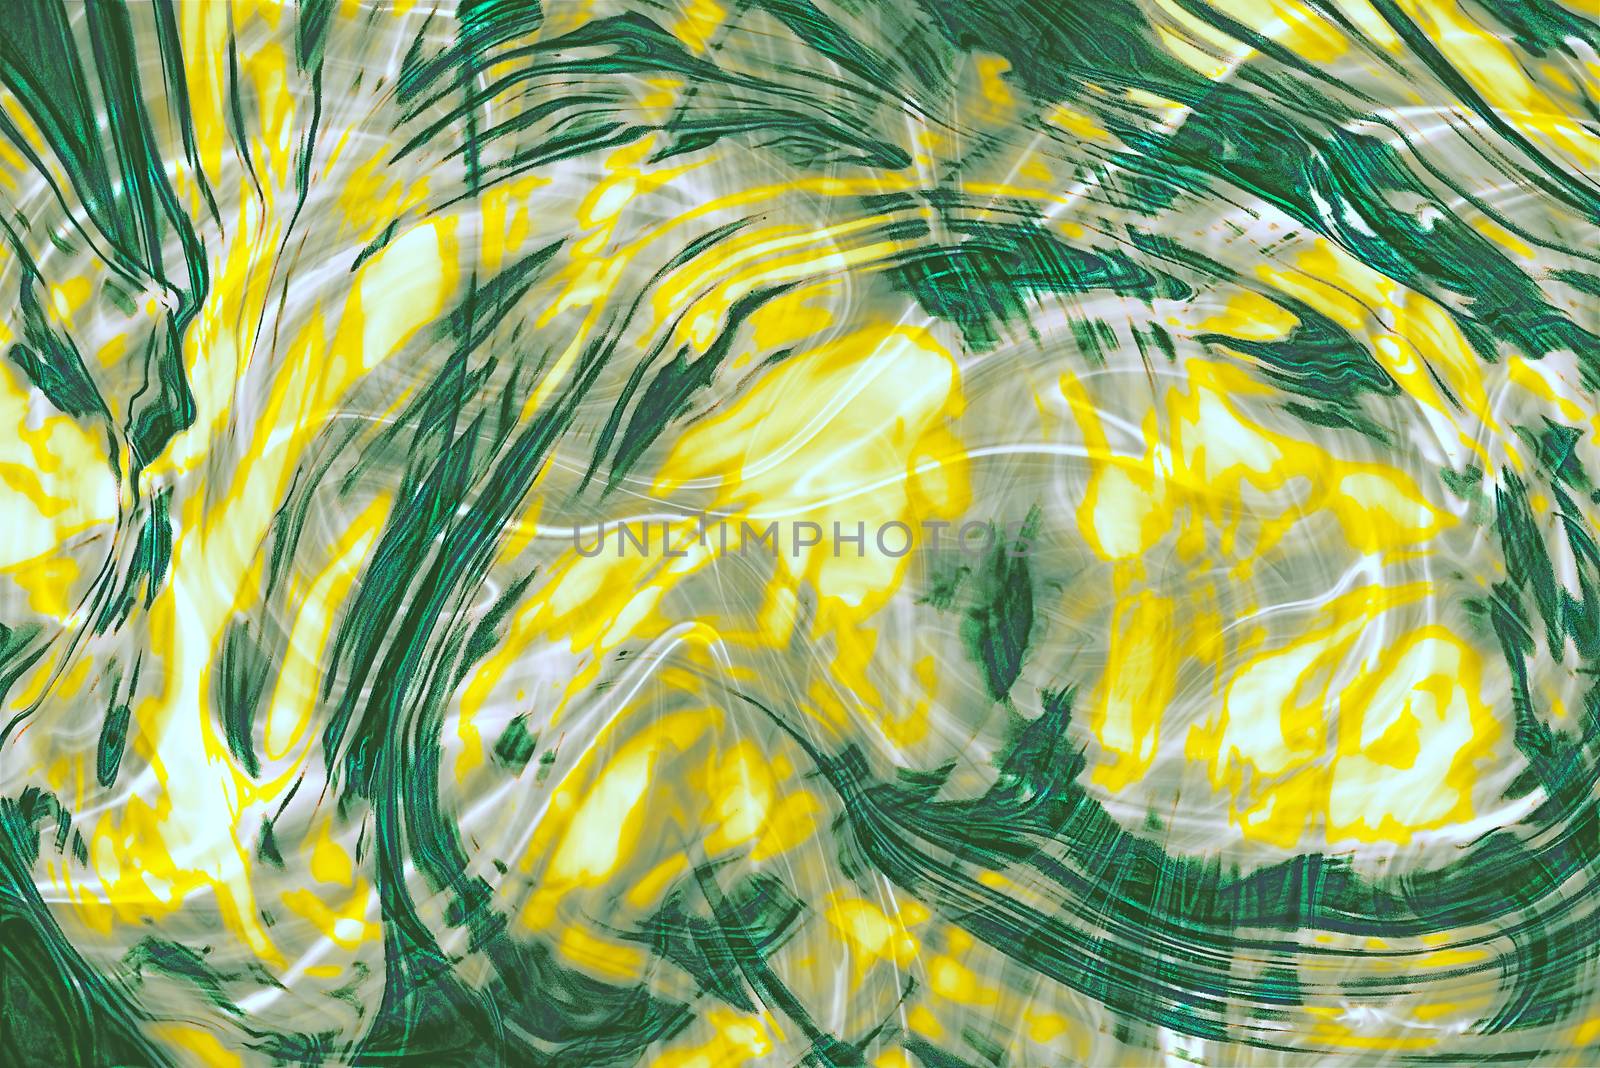 Smoke background. Abstract fluid pattern. Colorful painted background. Decorative smoke texture illustration